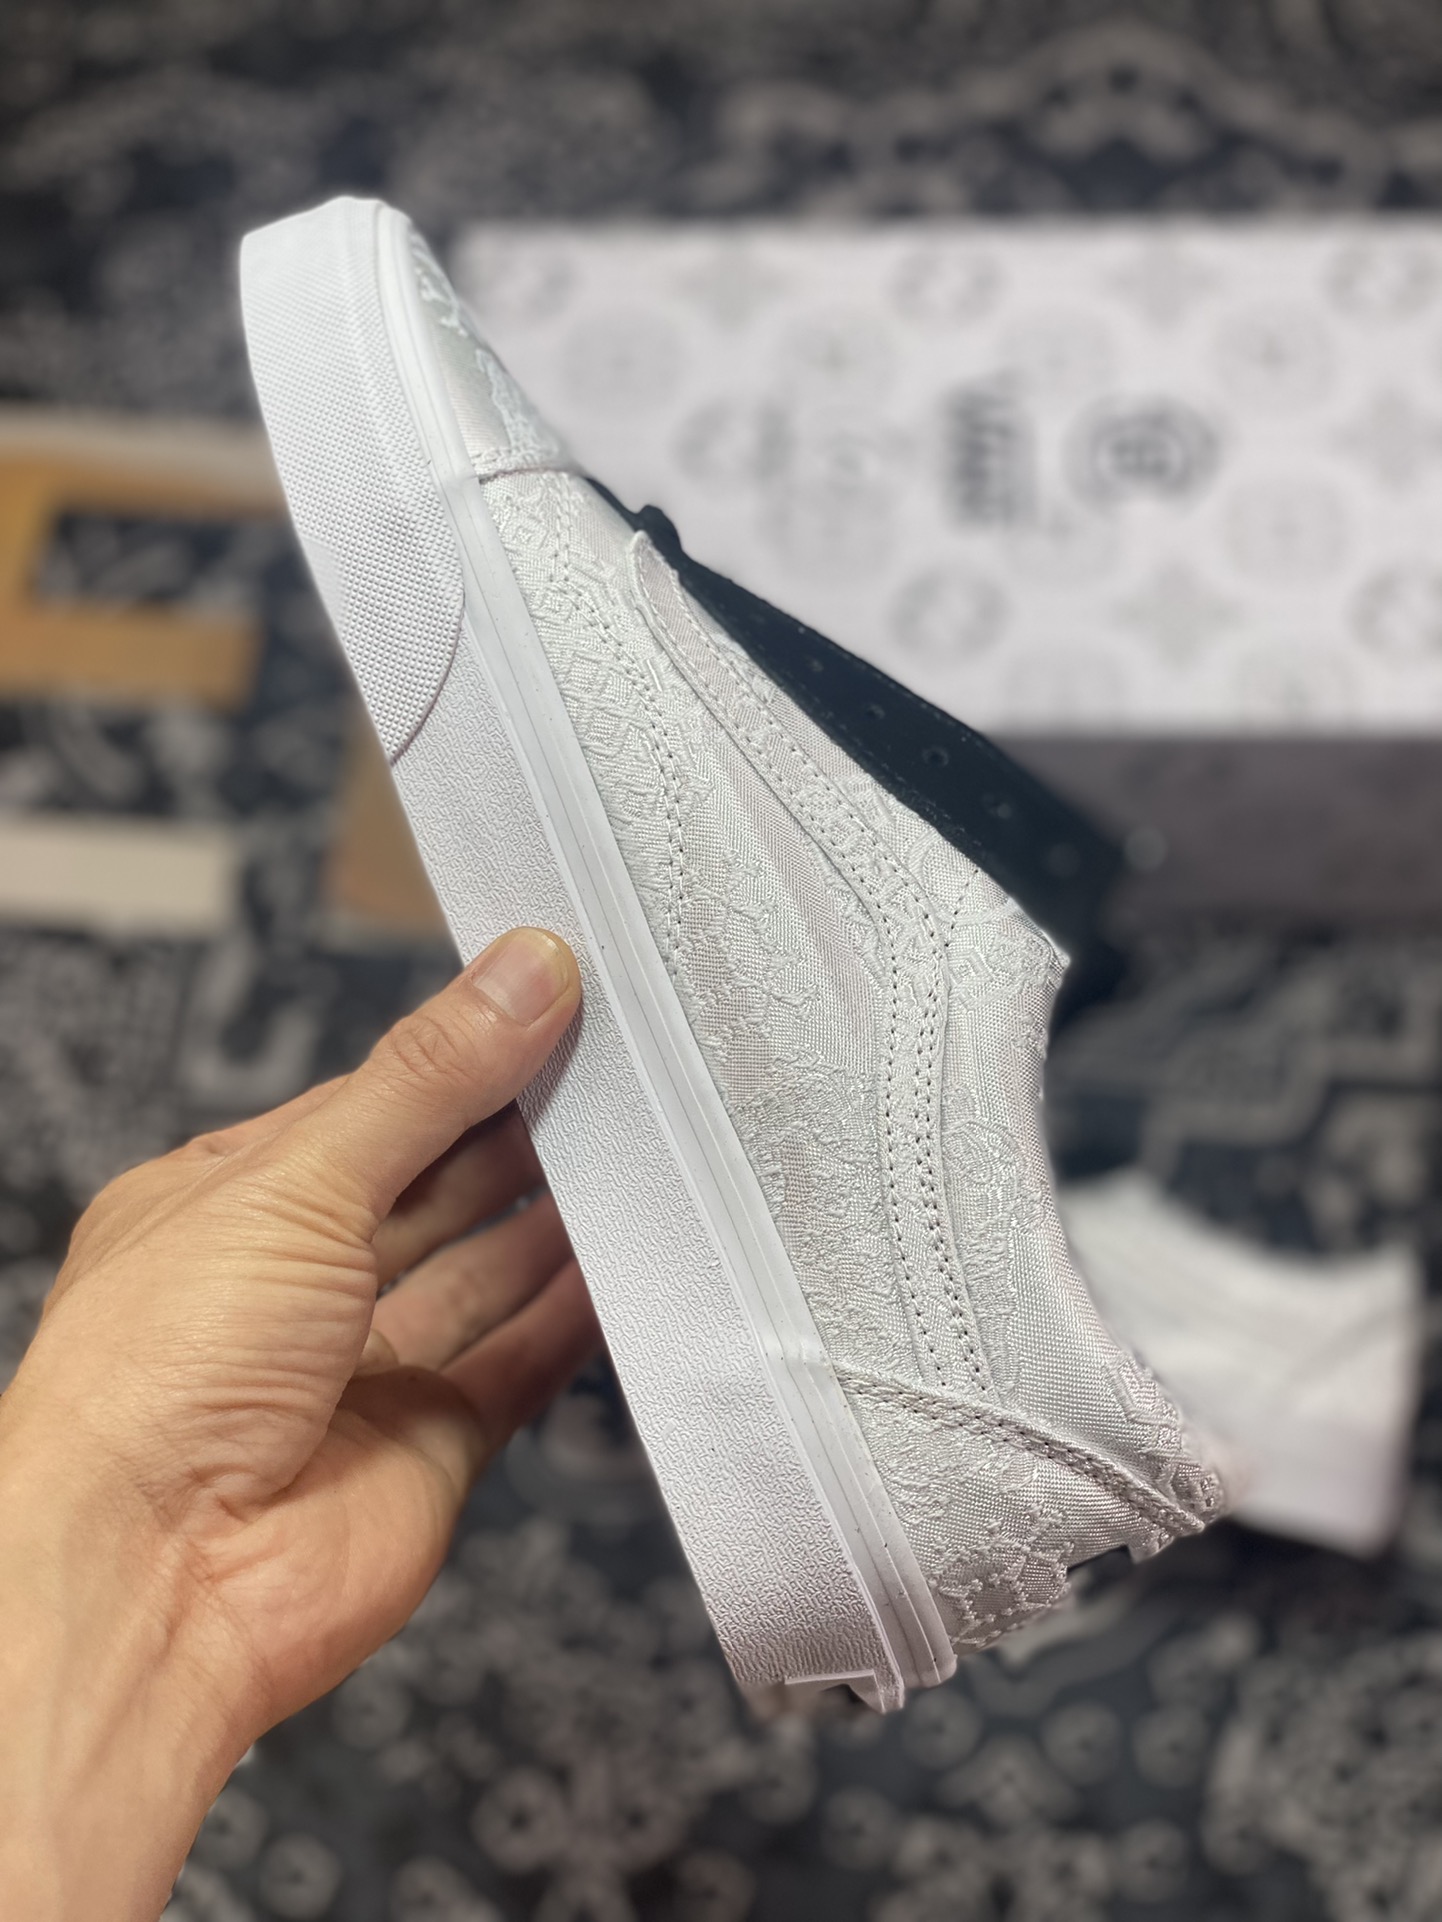 Clot x Fragment Design x Vans upper uses white silk material to cover the shoes